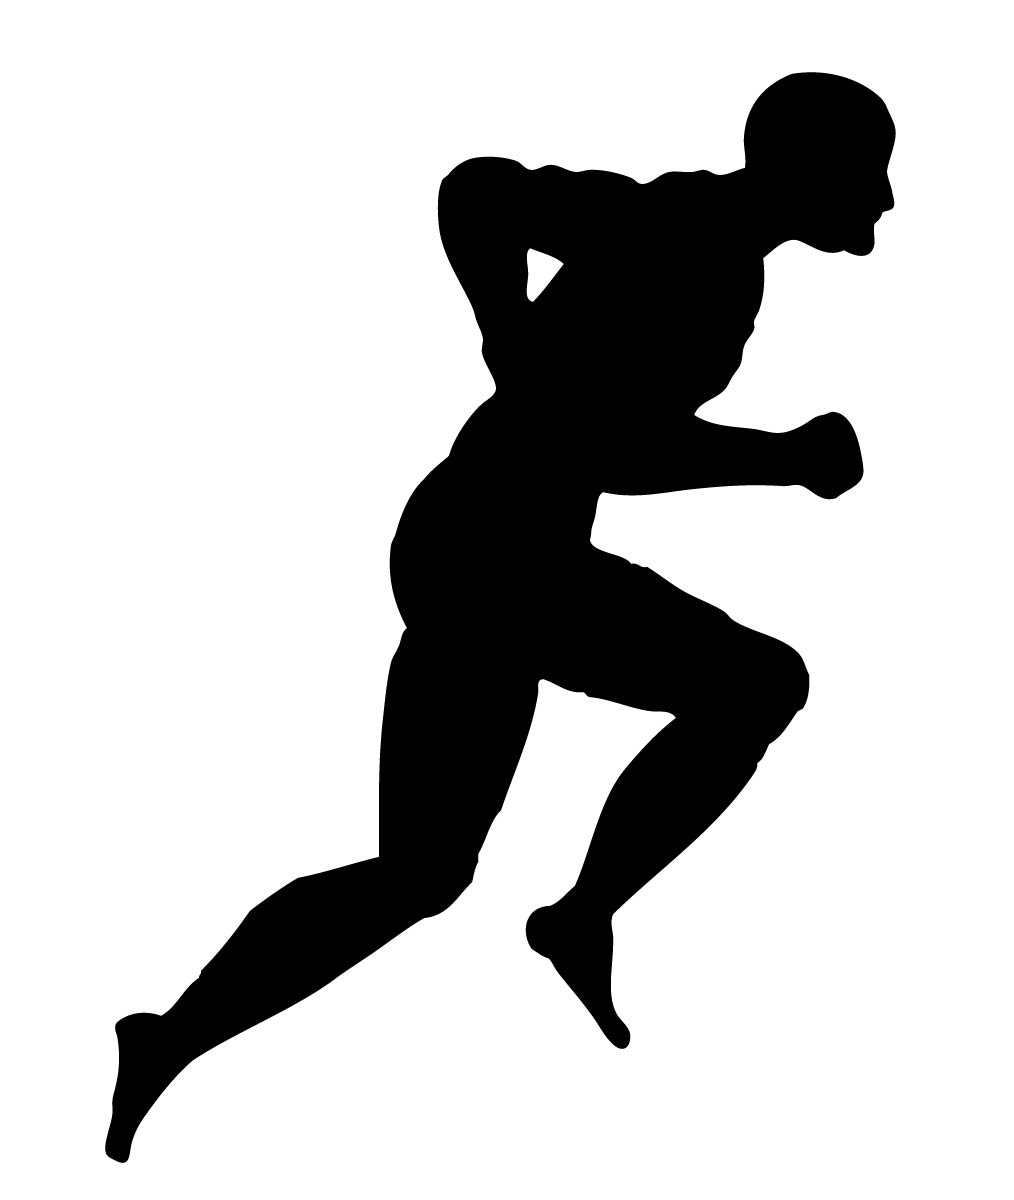 Running Silhouette - Clipart library